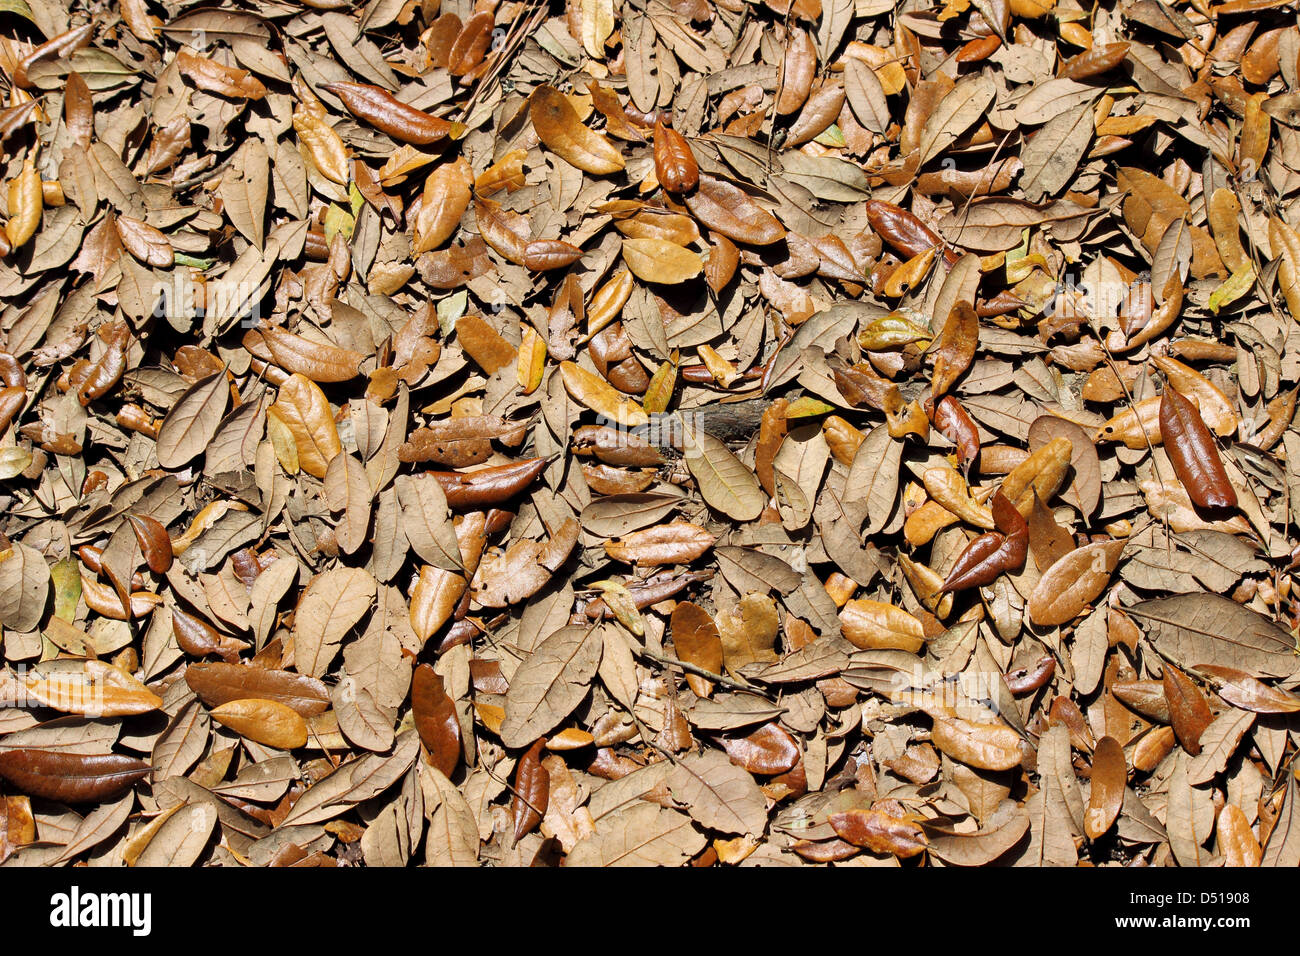 A forest floor covered in fallen leaves.outdoors Stock Photo